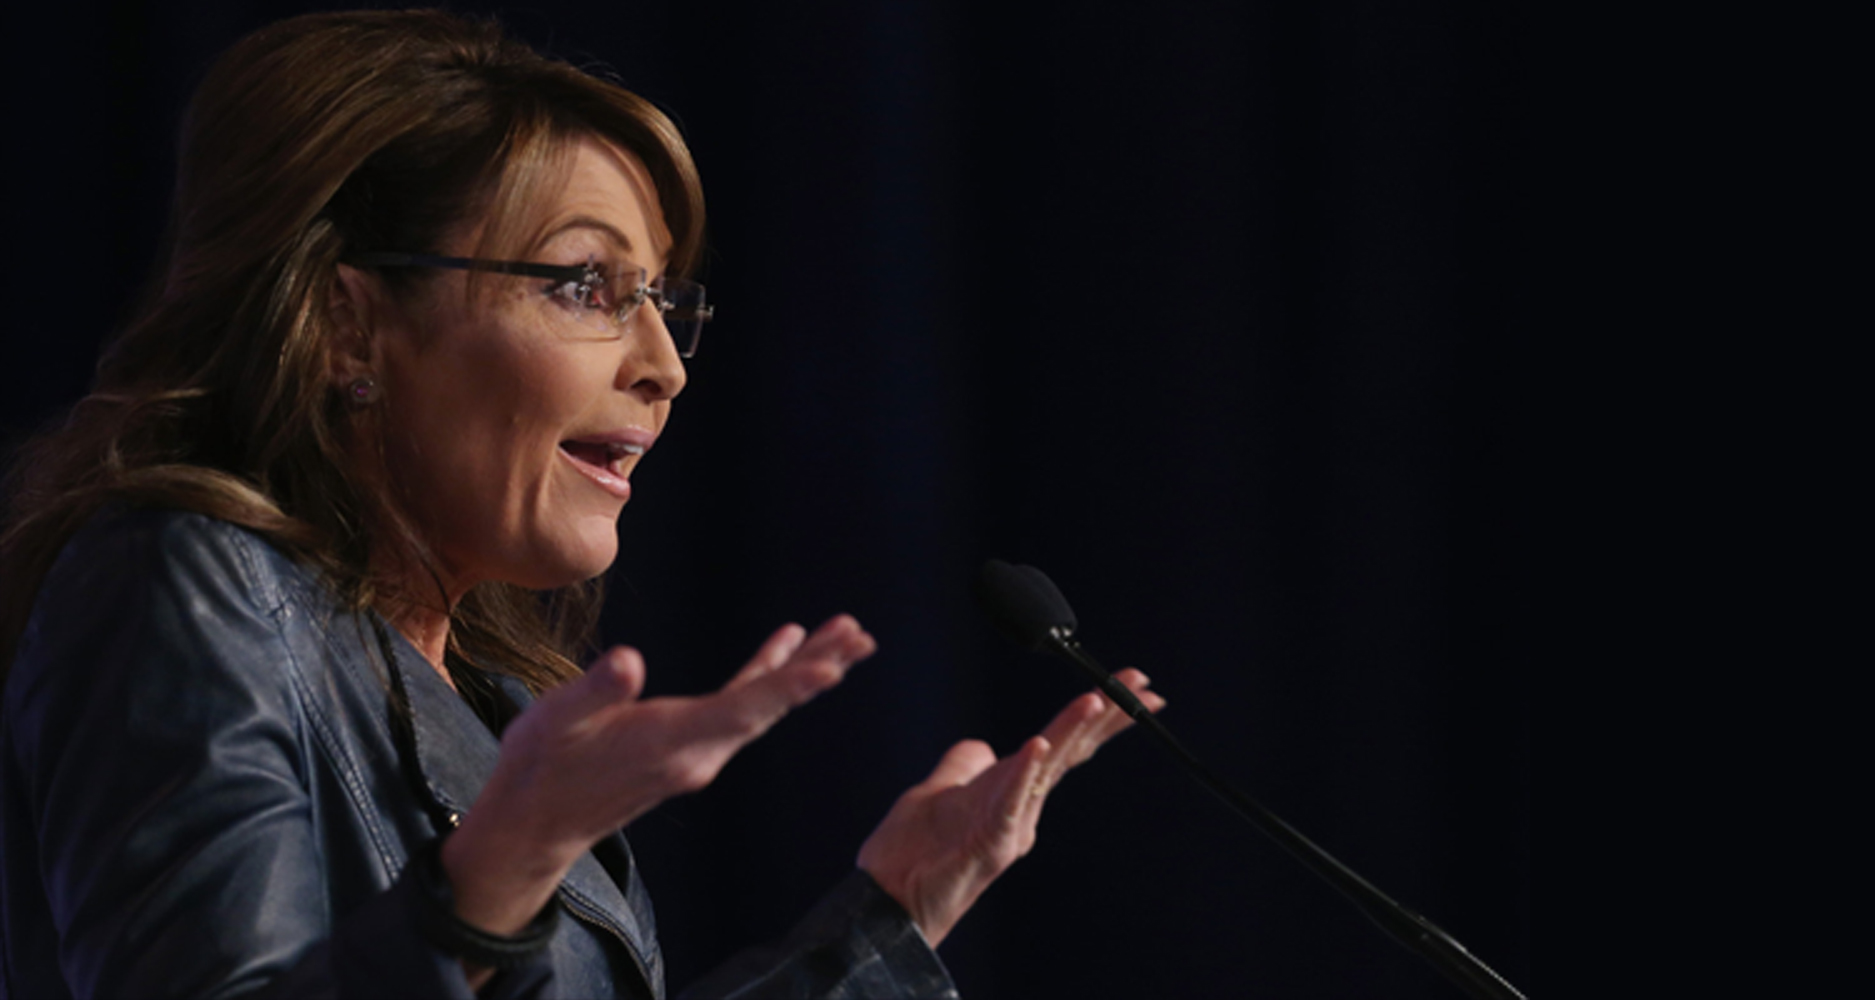 Sarah Palin Raised $25,000 For Hillary Clinton’s Election Campaign